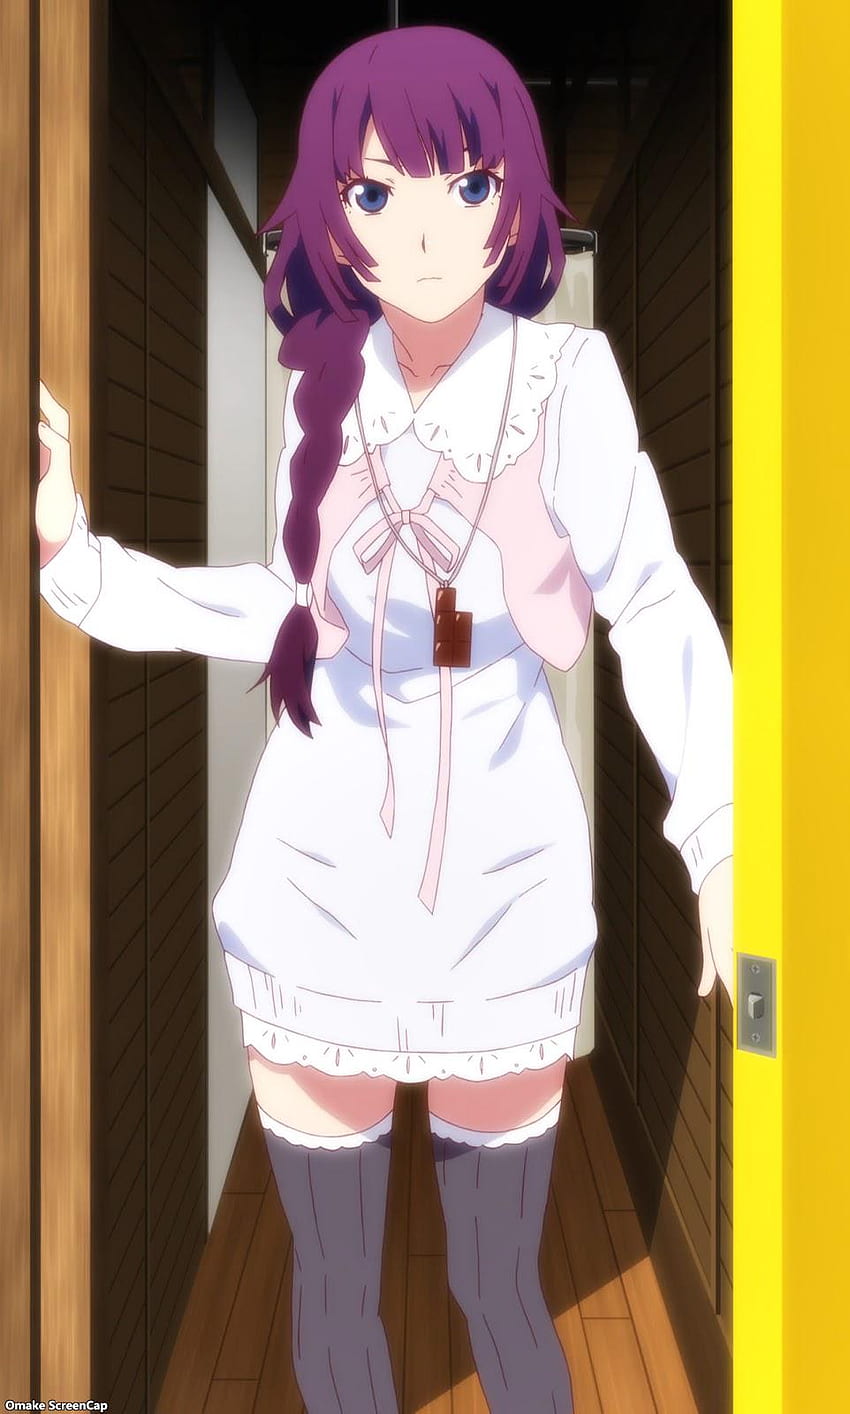 Senjougahara is my . When the phone is locked, it's a yellow door, and when I unlock it Hitagi opens it and welcome me :, ) : araragi HD phone wallpaper